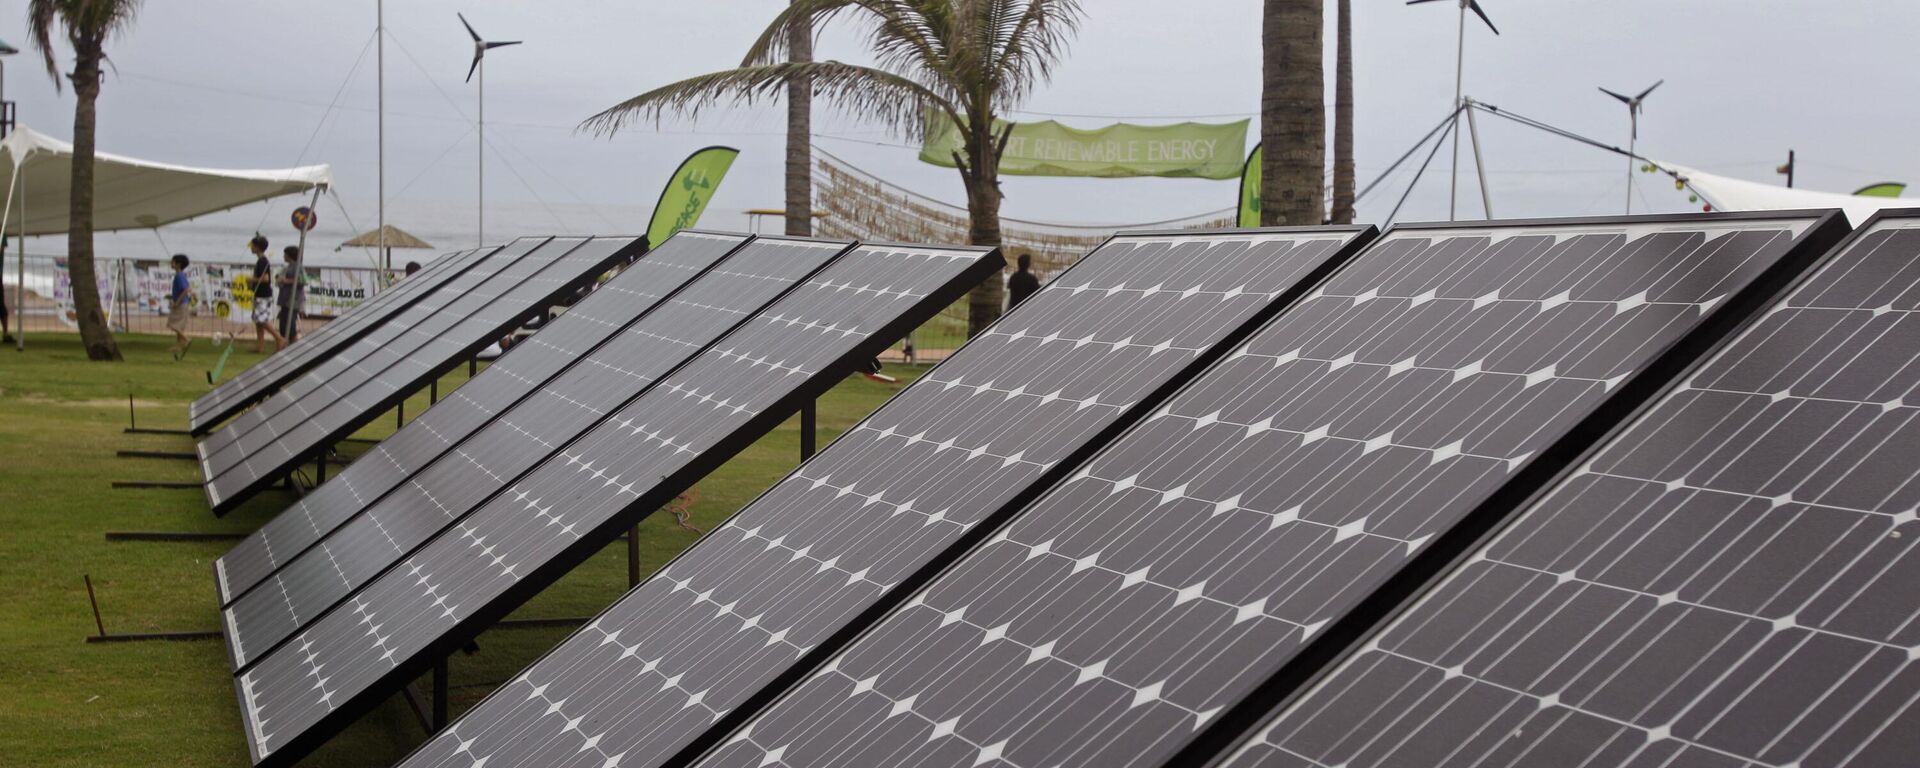 Solar panels are used to generate electricity at the Greenpeace exhibit during the climate change conference in Durban, South Africa, Tuesday, Nov 29, 2011.  - Sputnik Africa, 1920, 05.12.2023